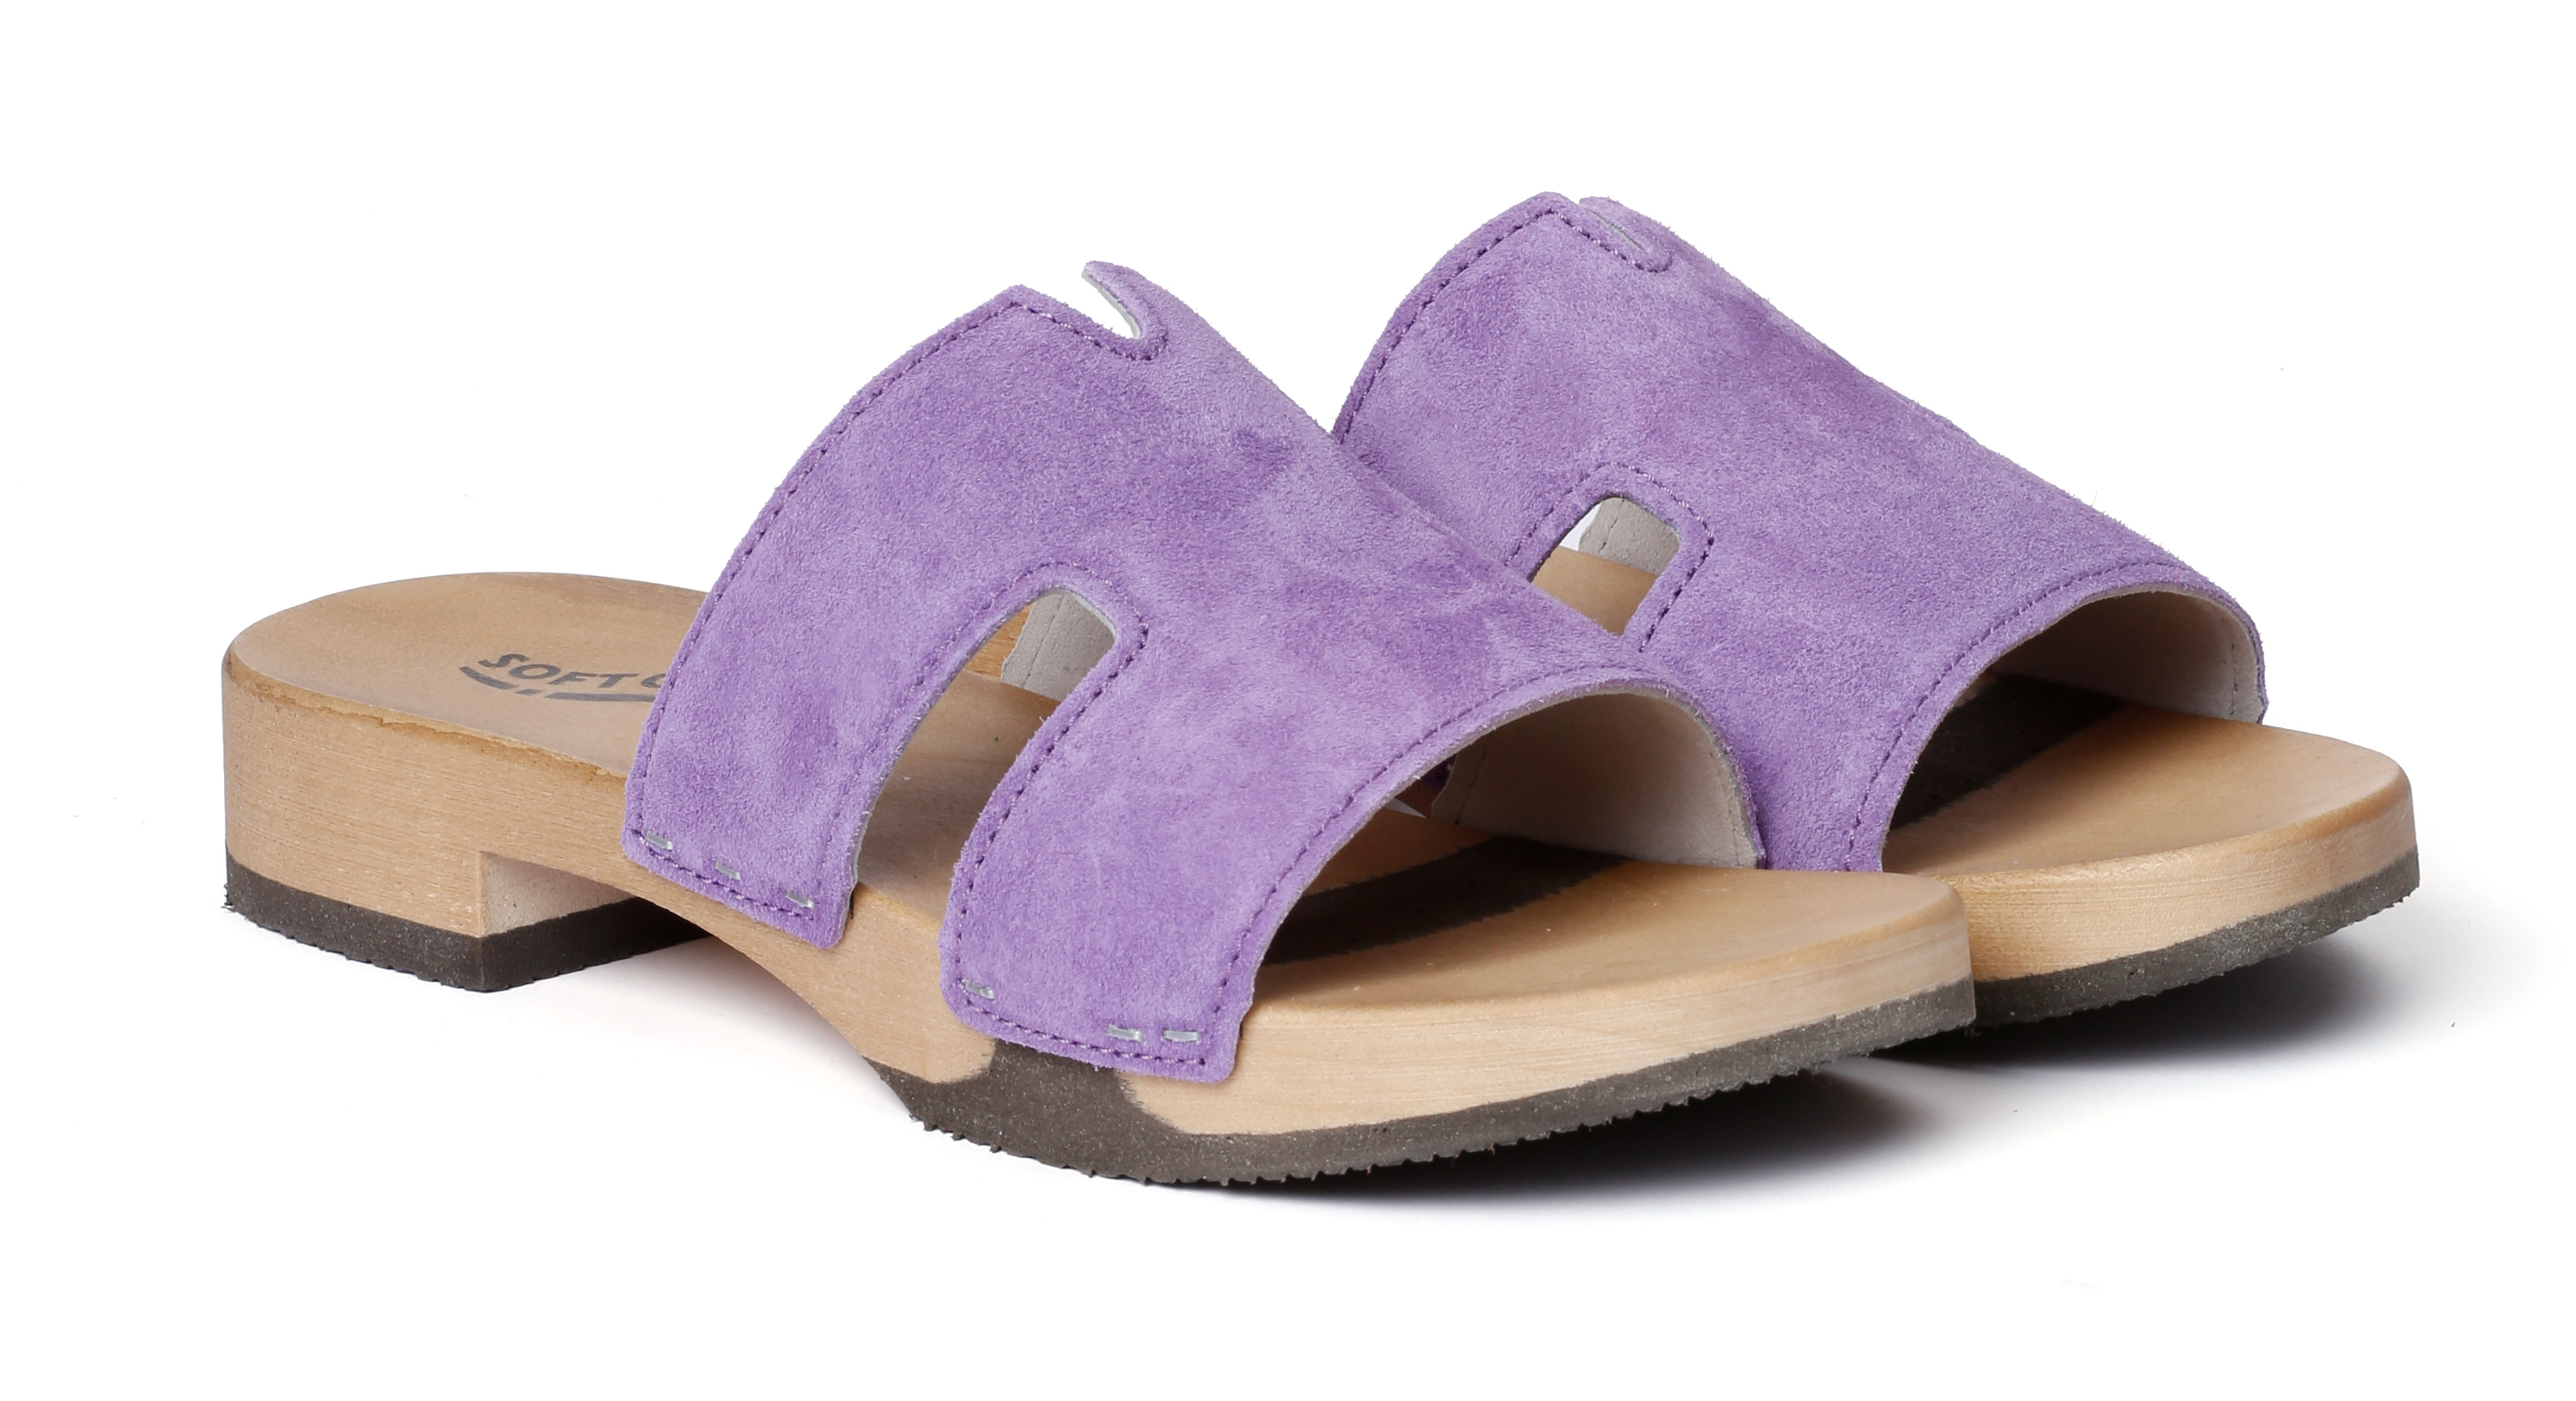 Shoe mule, made from poplar wood with smooth suede in color violet by Softclox